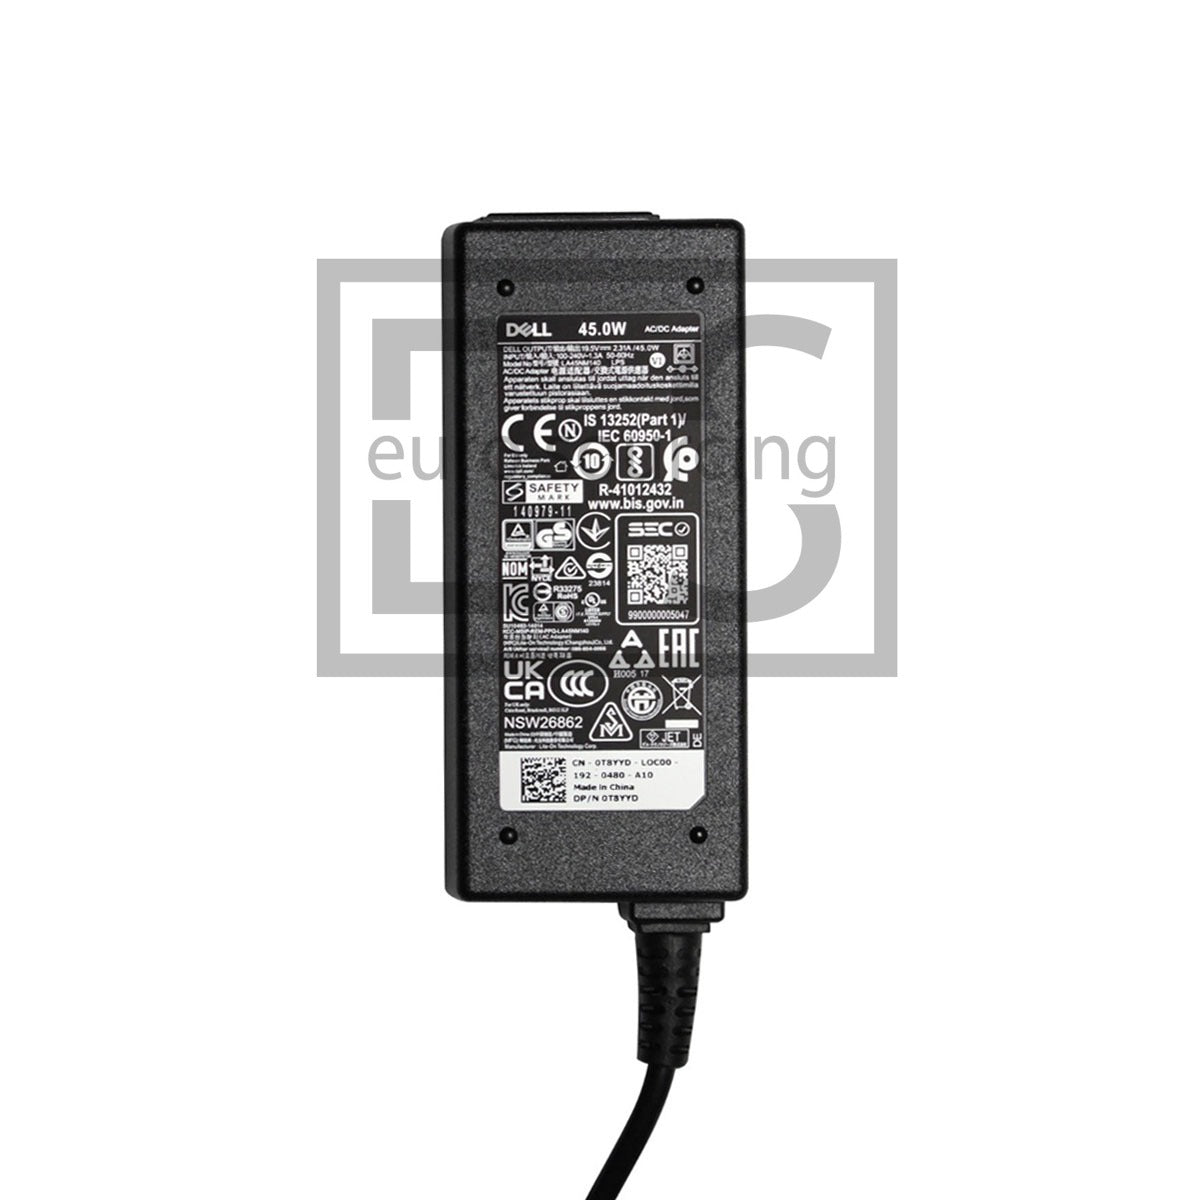 Genuine DELL 19.5V 2.31A DELC231 *ROUND* TYPE DELL BRAND 45W AC ADAPTER 4.5MM x 3.0MM Compatible With DELL XPS 13-925SLV